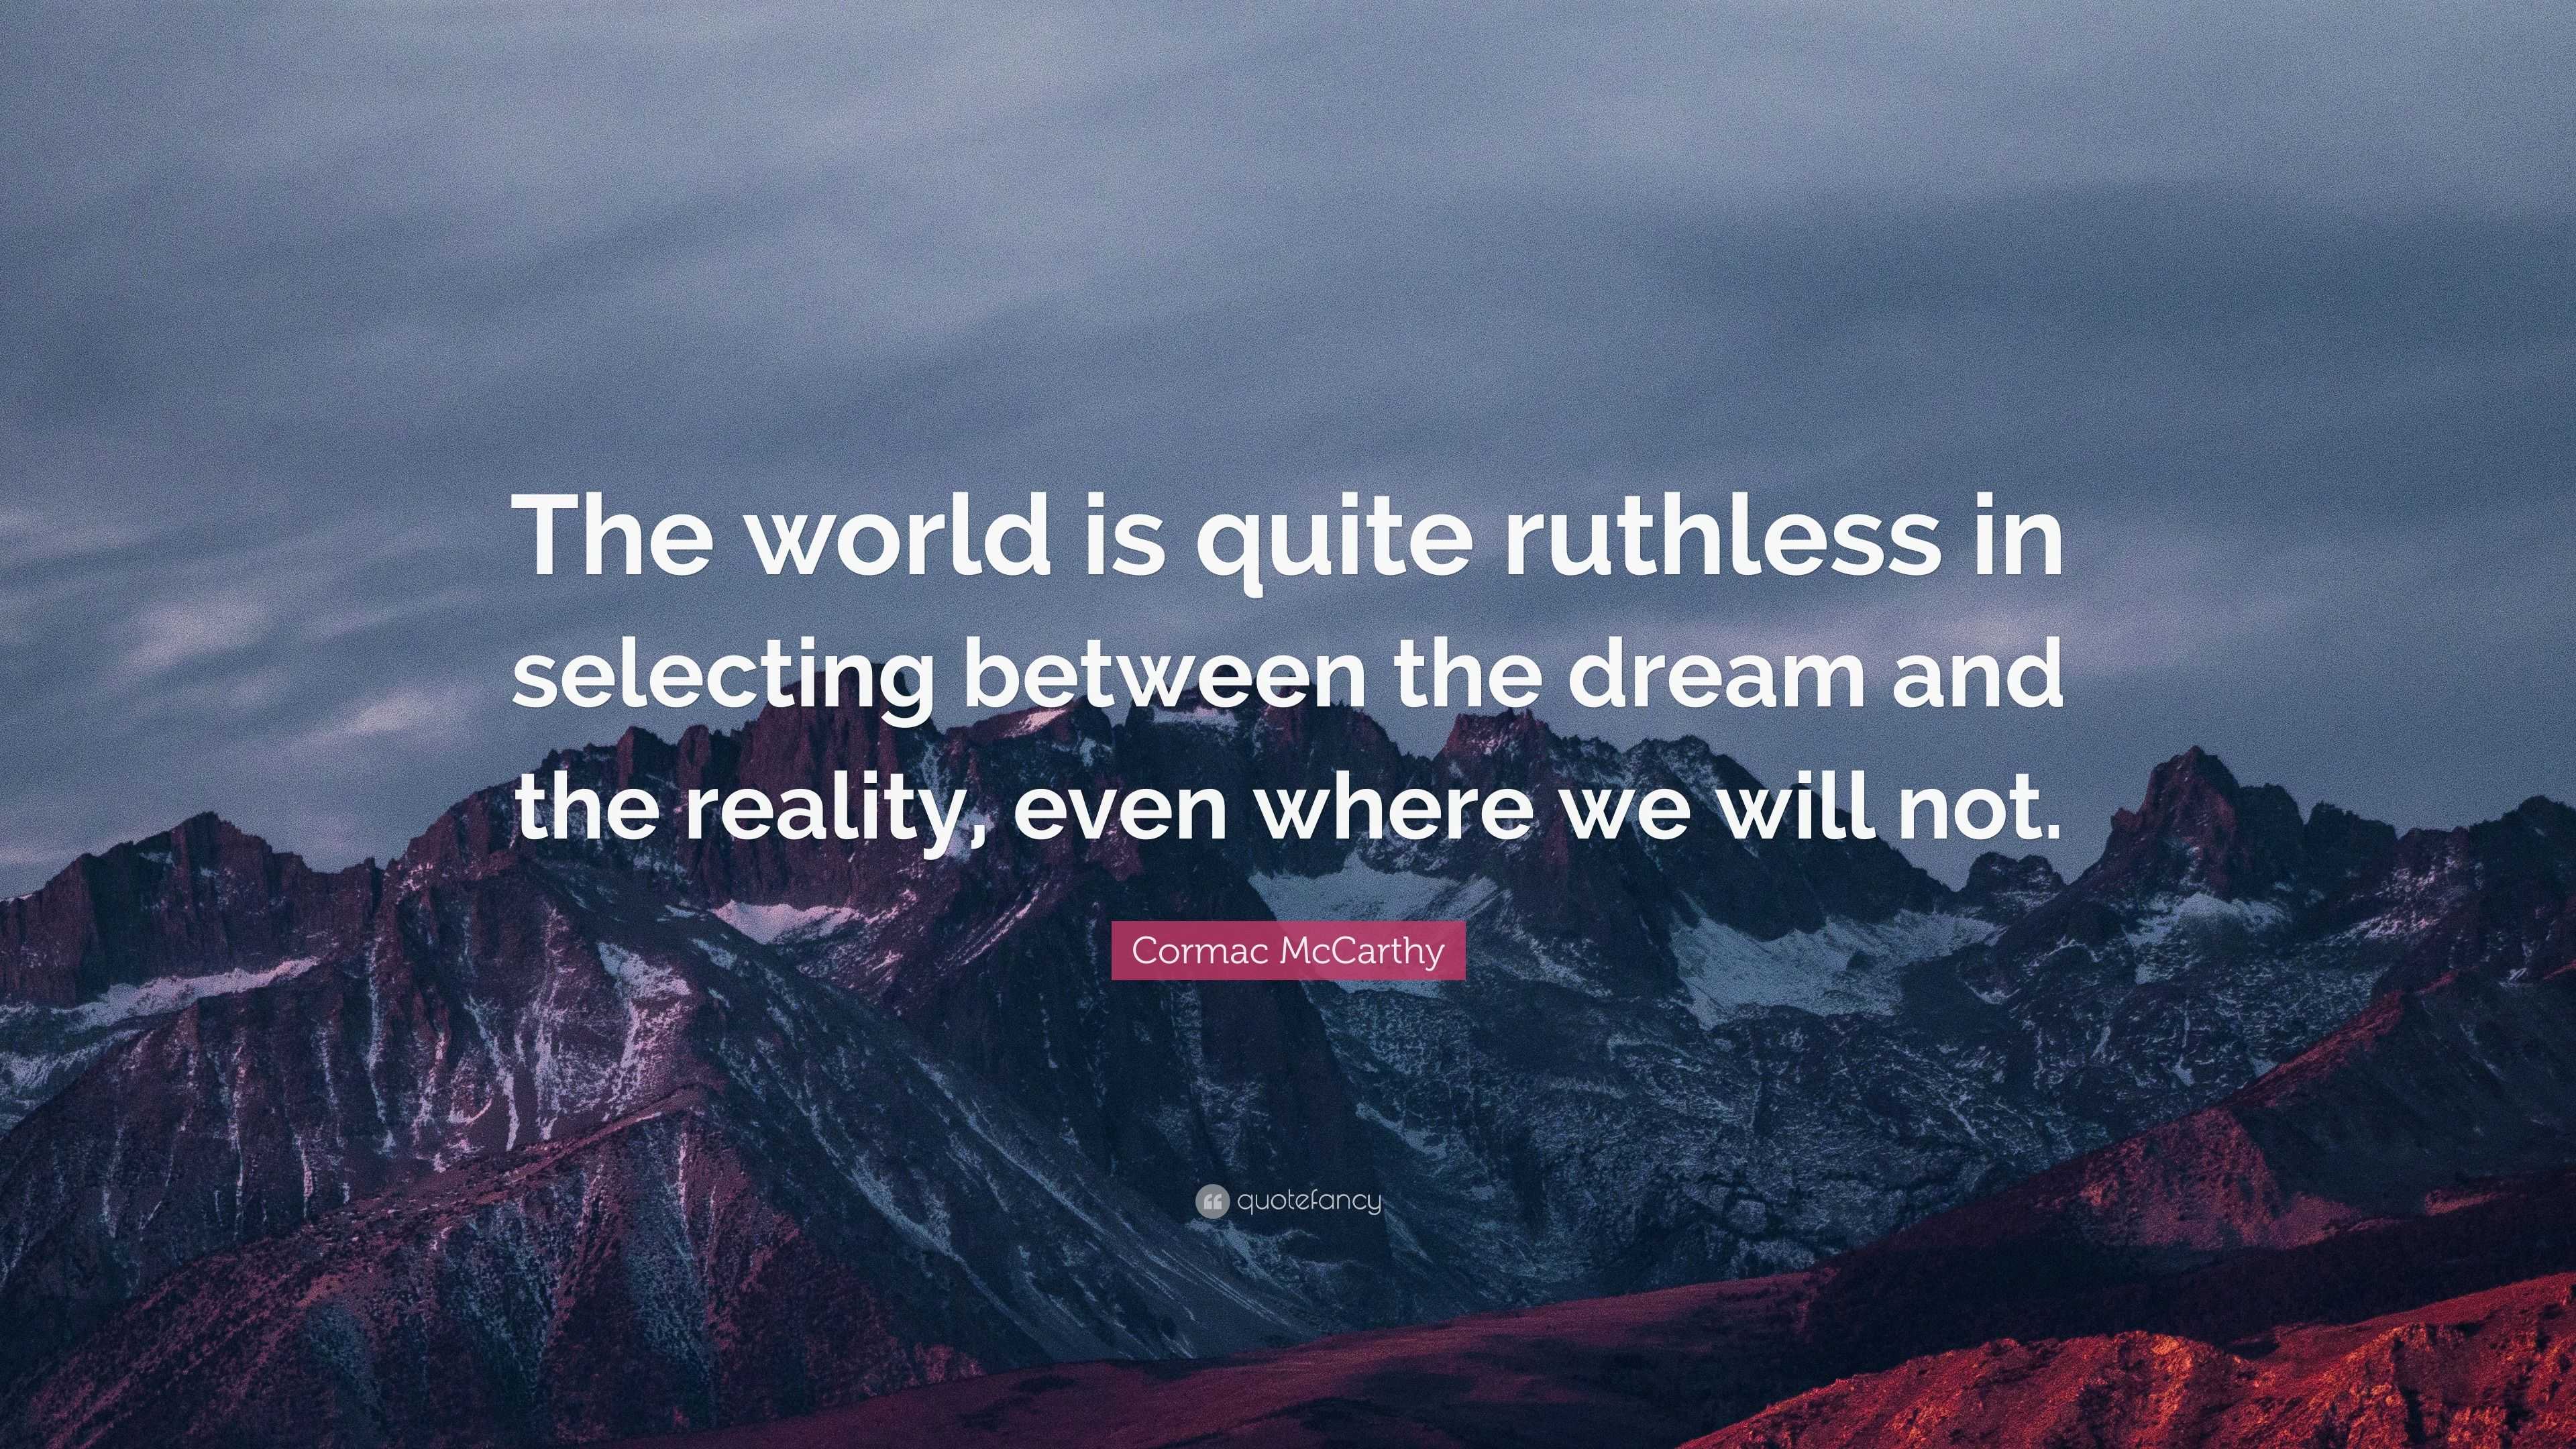 Cormac McCarthy Quote: “The world is quite ruthless in selecting ...